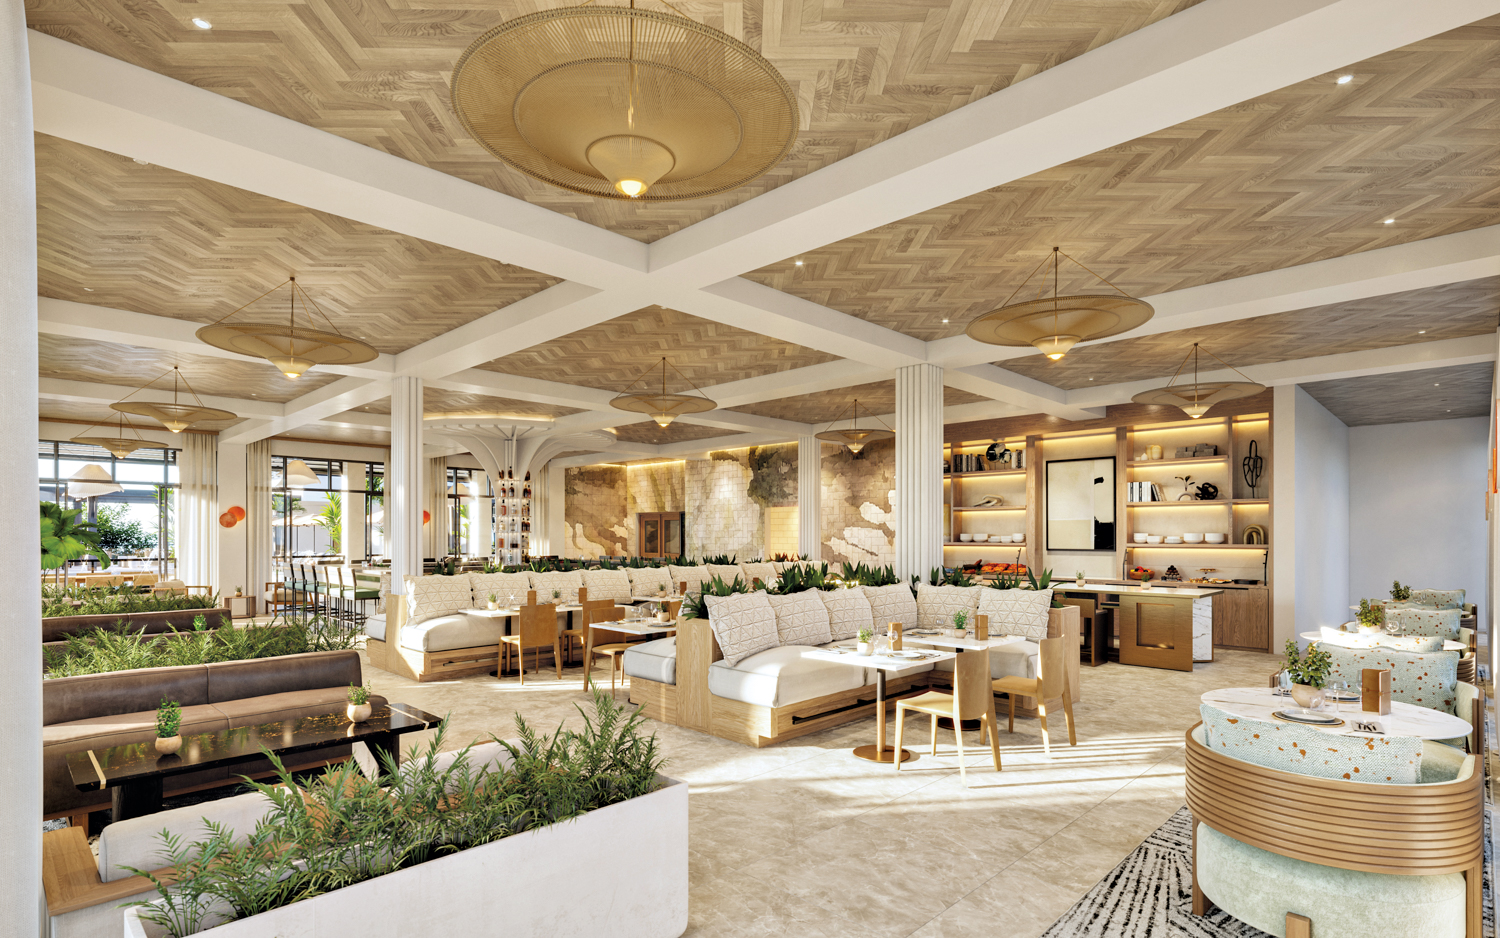 AC Hotel Naples 5th Avenue lobby with an earthy palette and a wood ceiling in a herringbone pattern